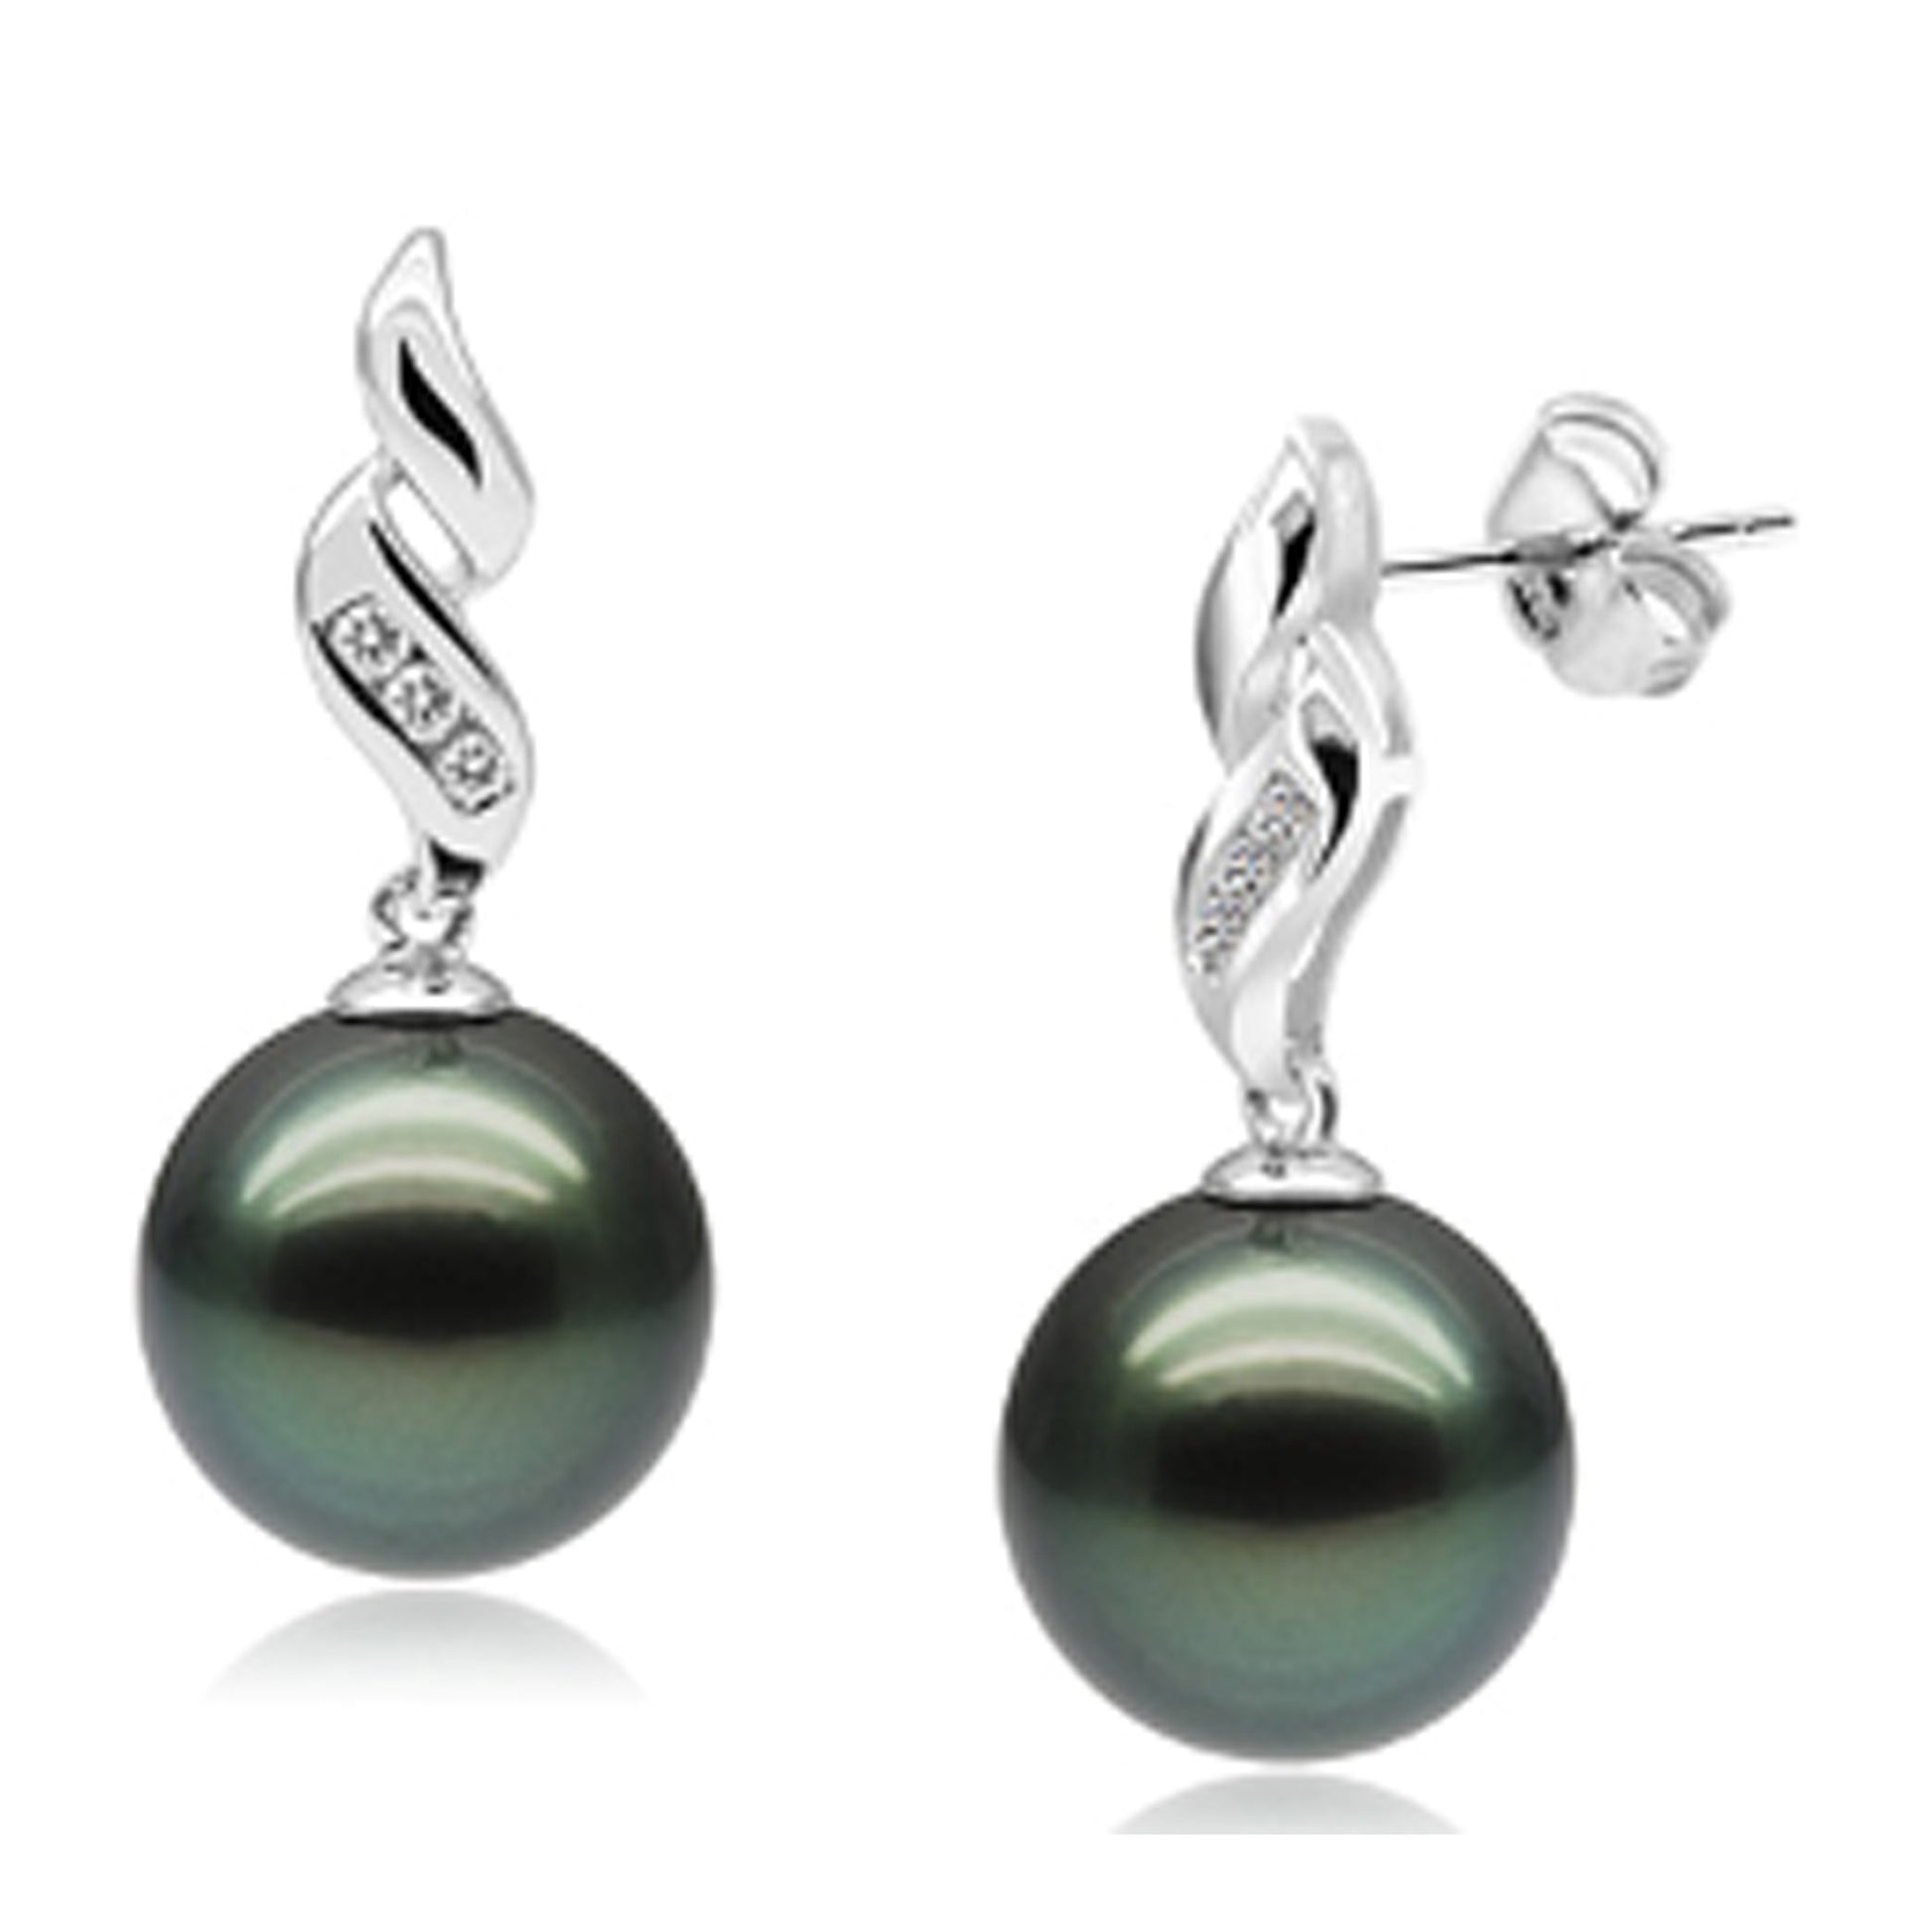 Tahitian Black Pearl Earring 14K white gold - Providence silver gold jewelry usa